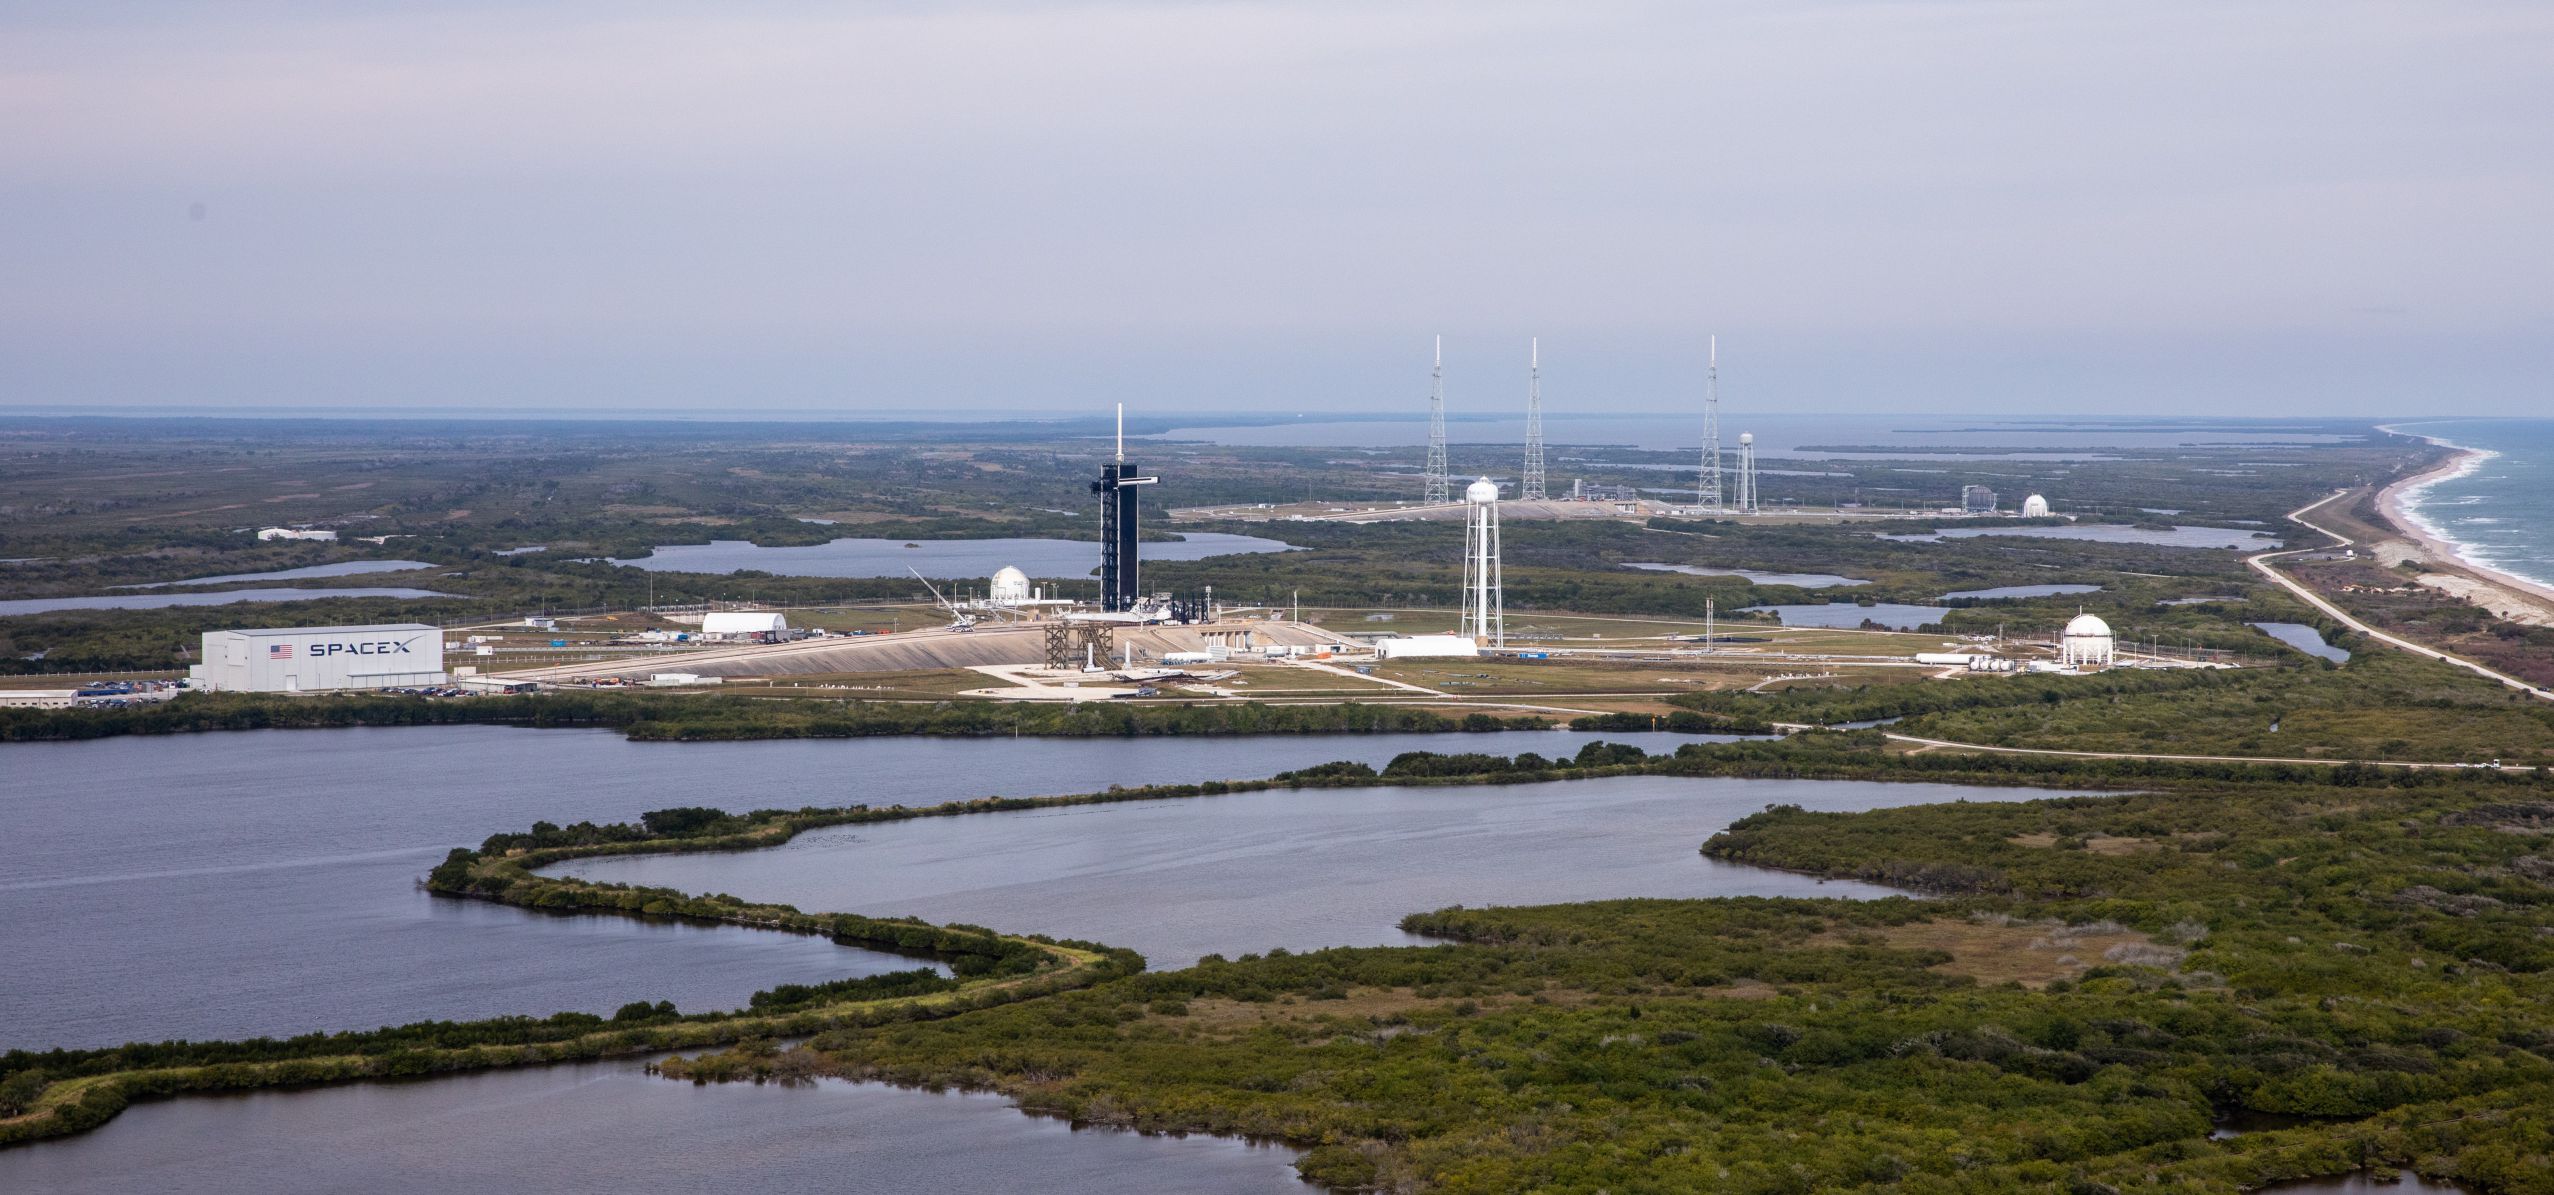 SpaceX Pad 39A overview 011321 (NASA) 1 crop (c)